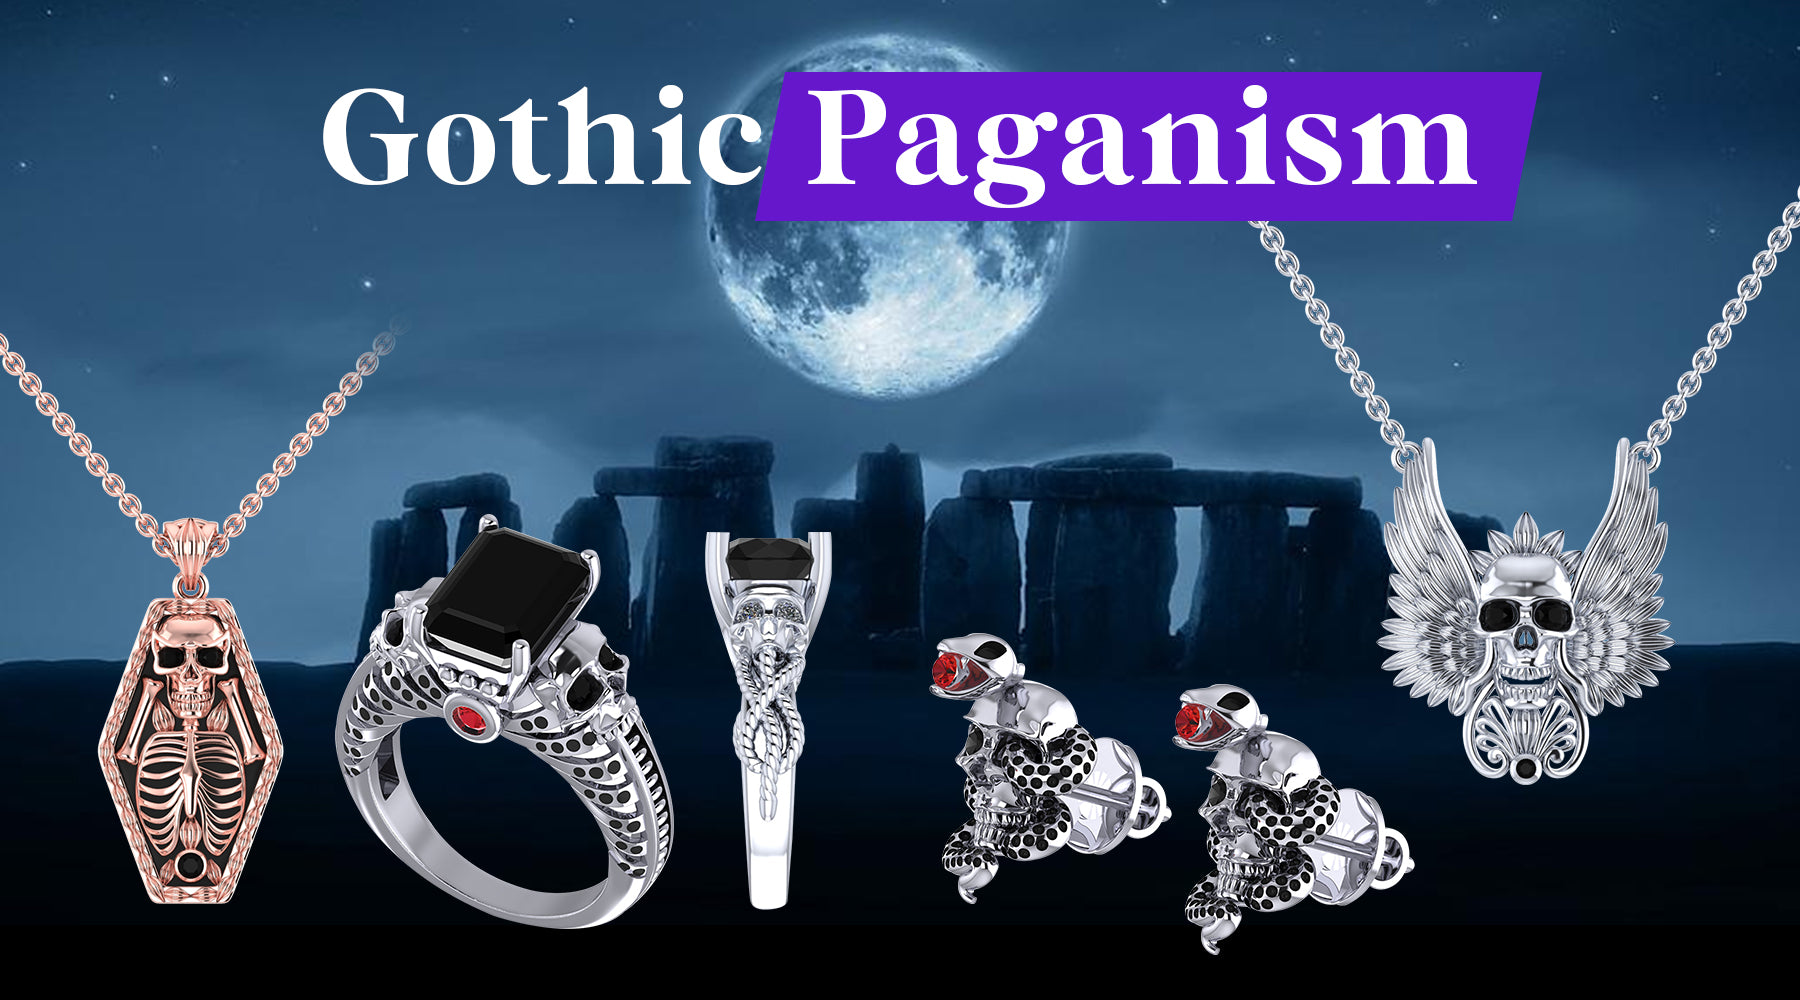 Discover Gothic Paganism Through the Gleam of Jewelry